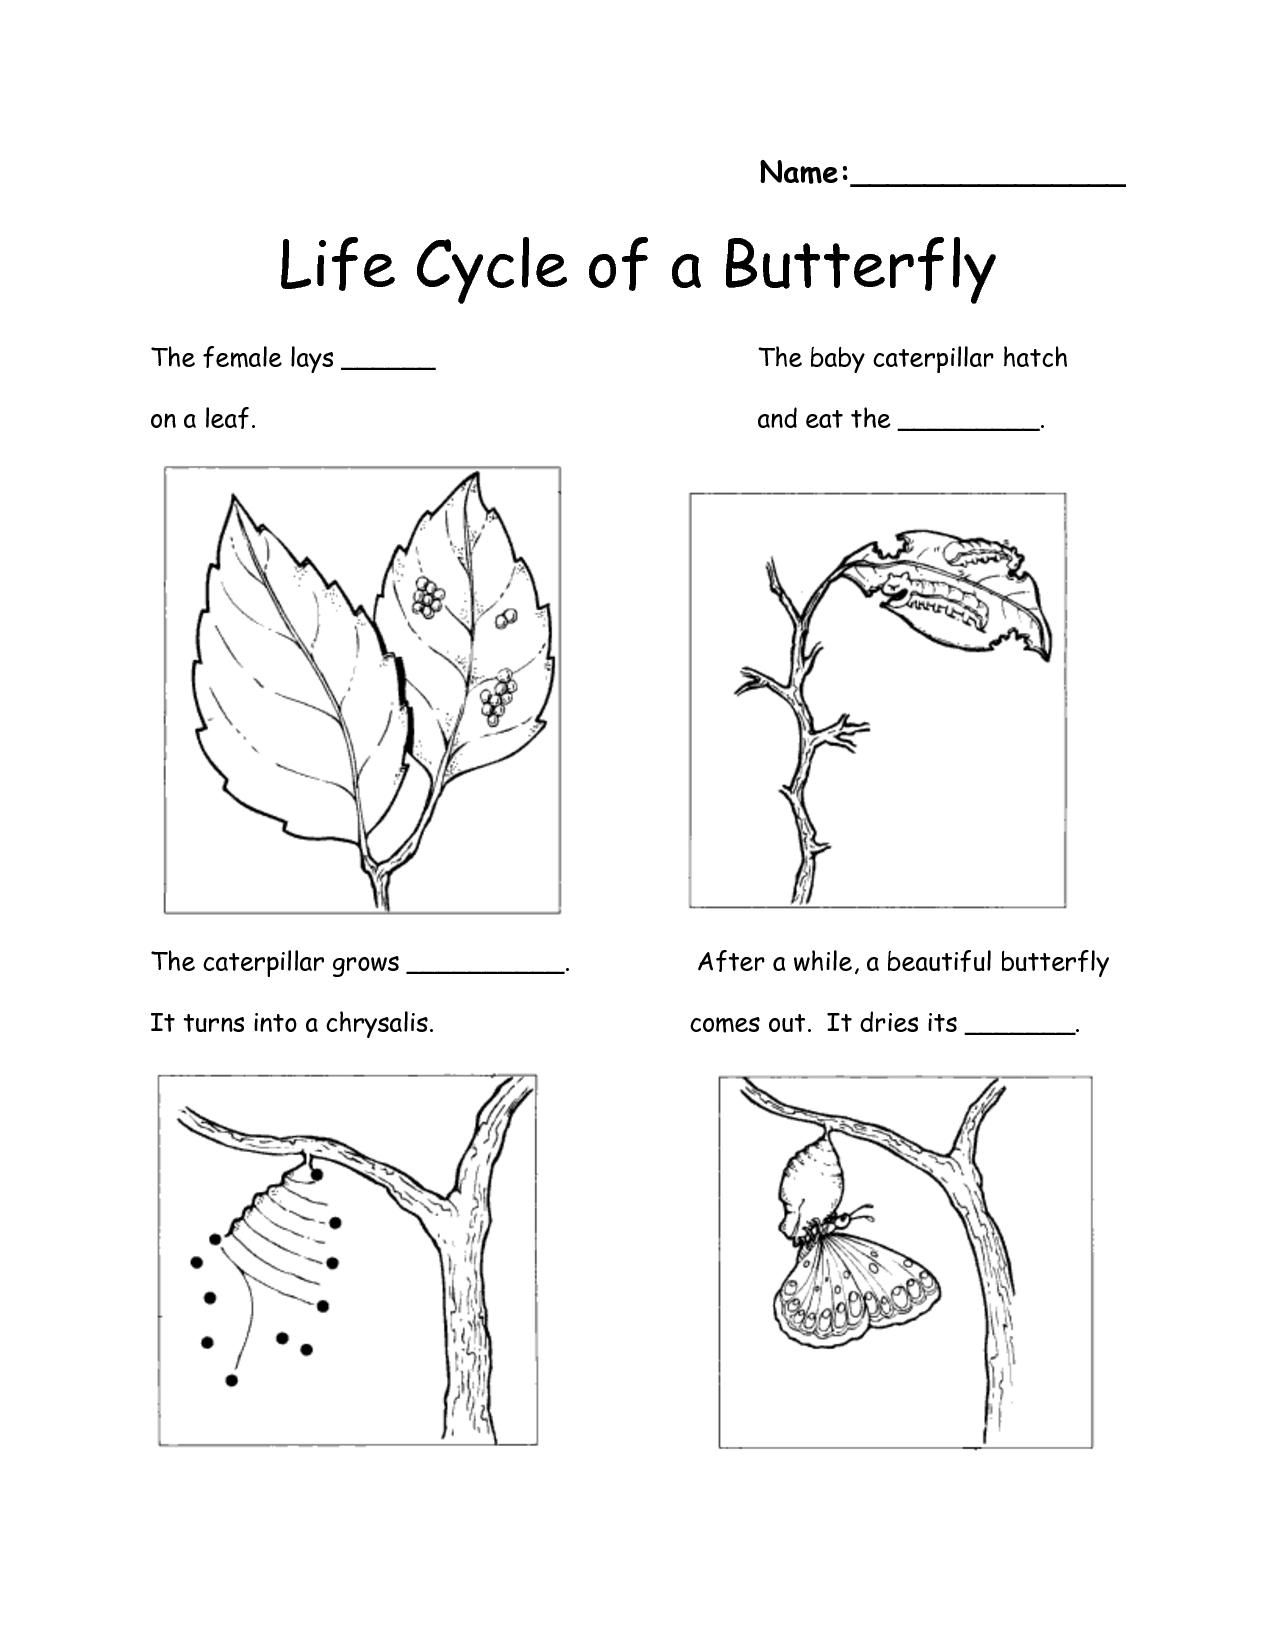 Printable Science Worksheets For 2Nd Grade Lexia s Blog